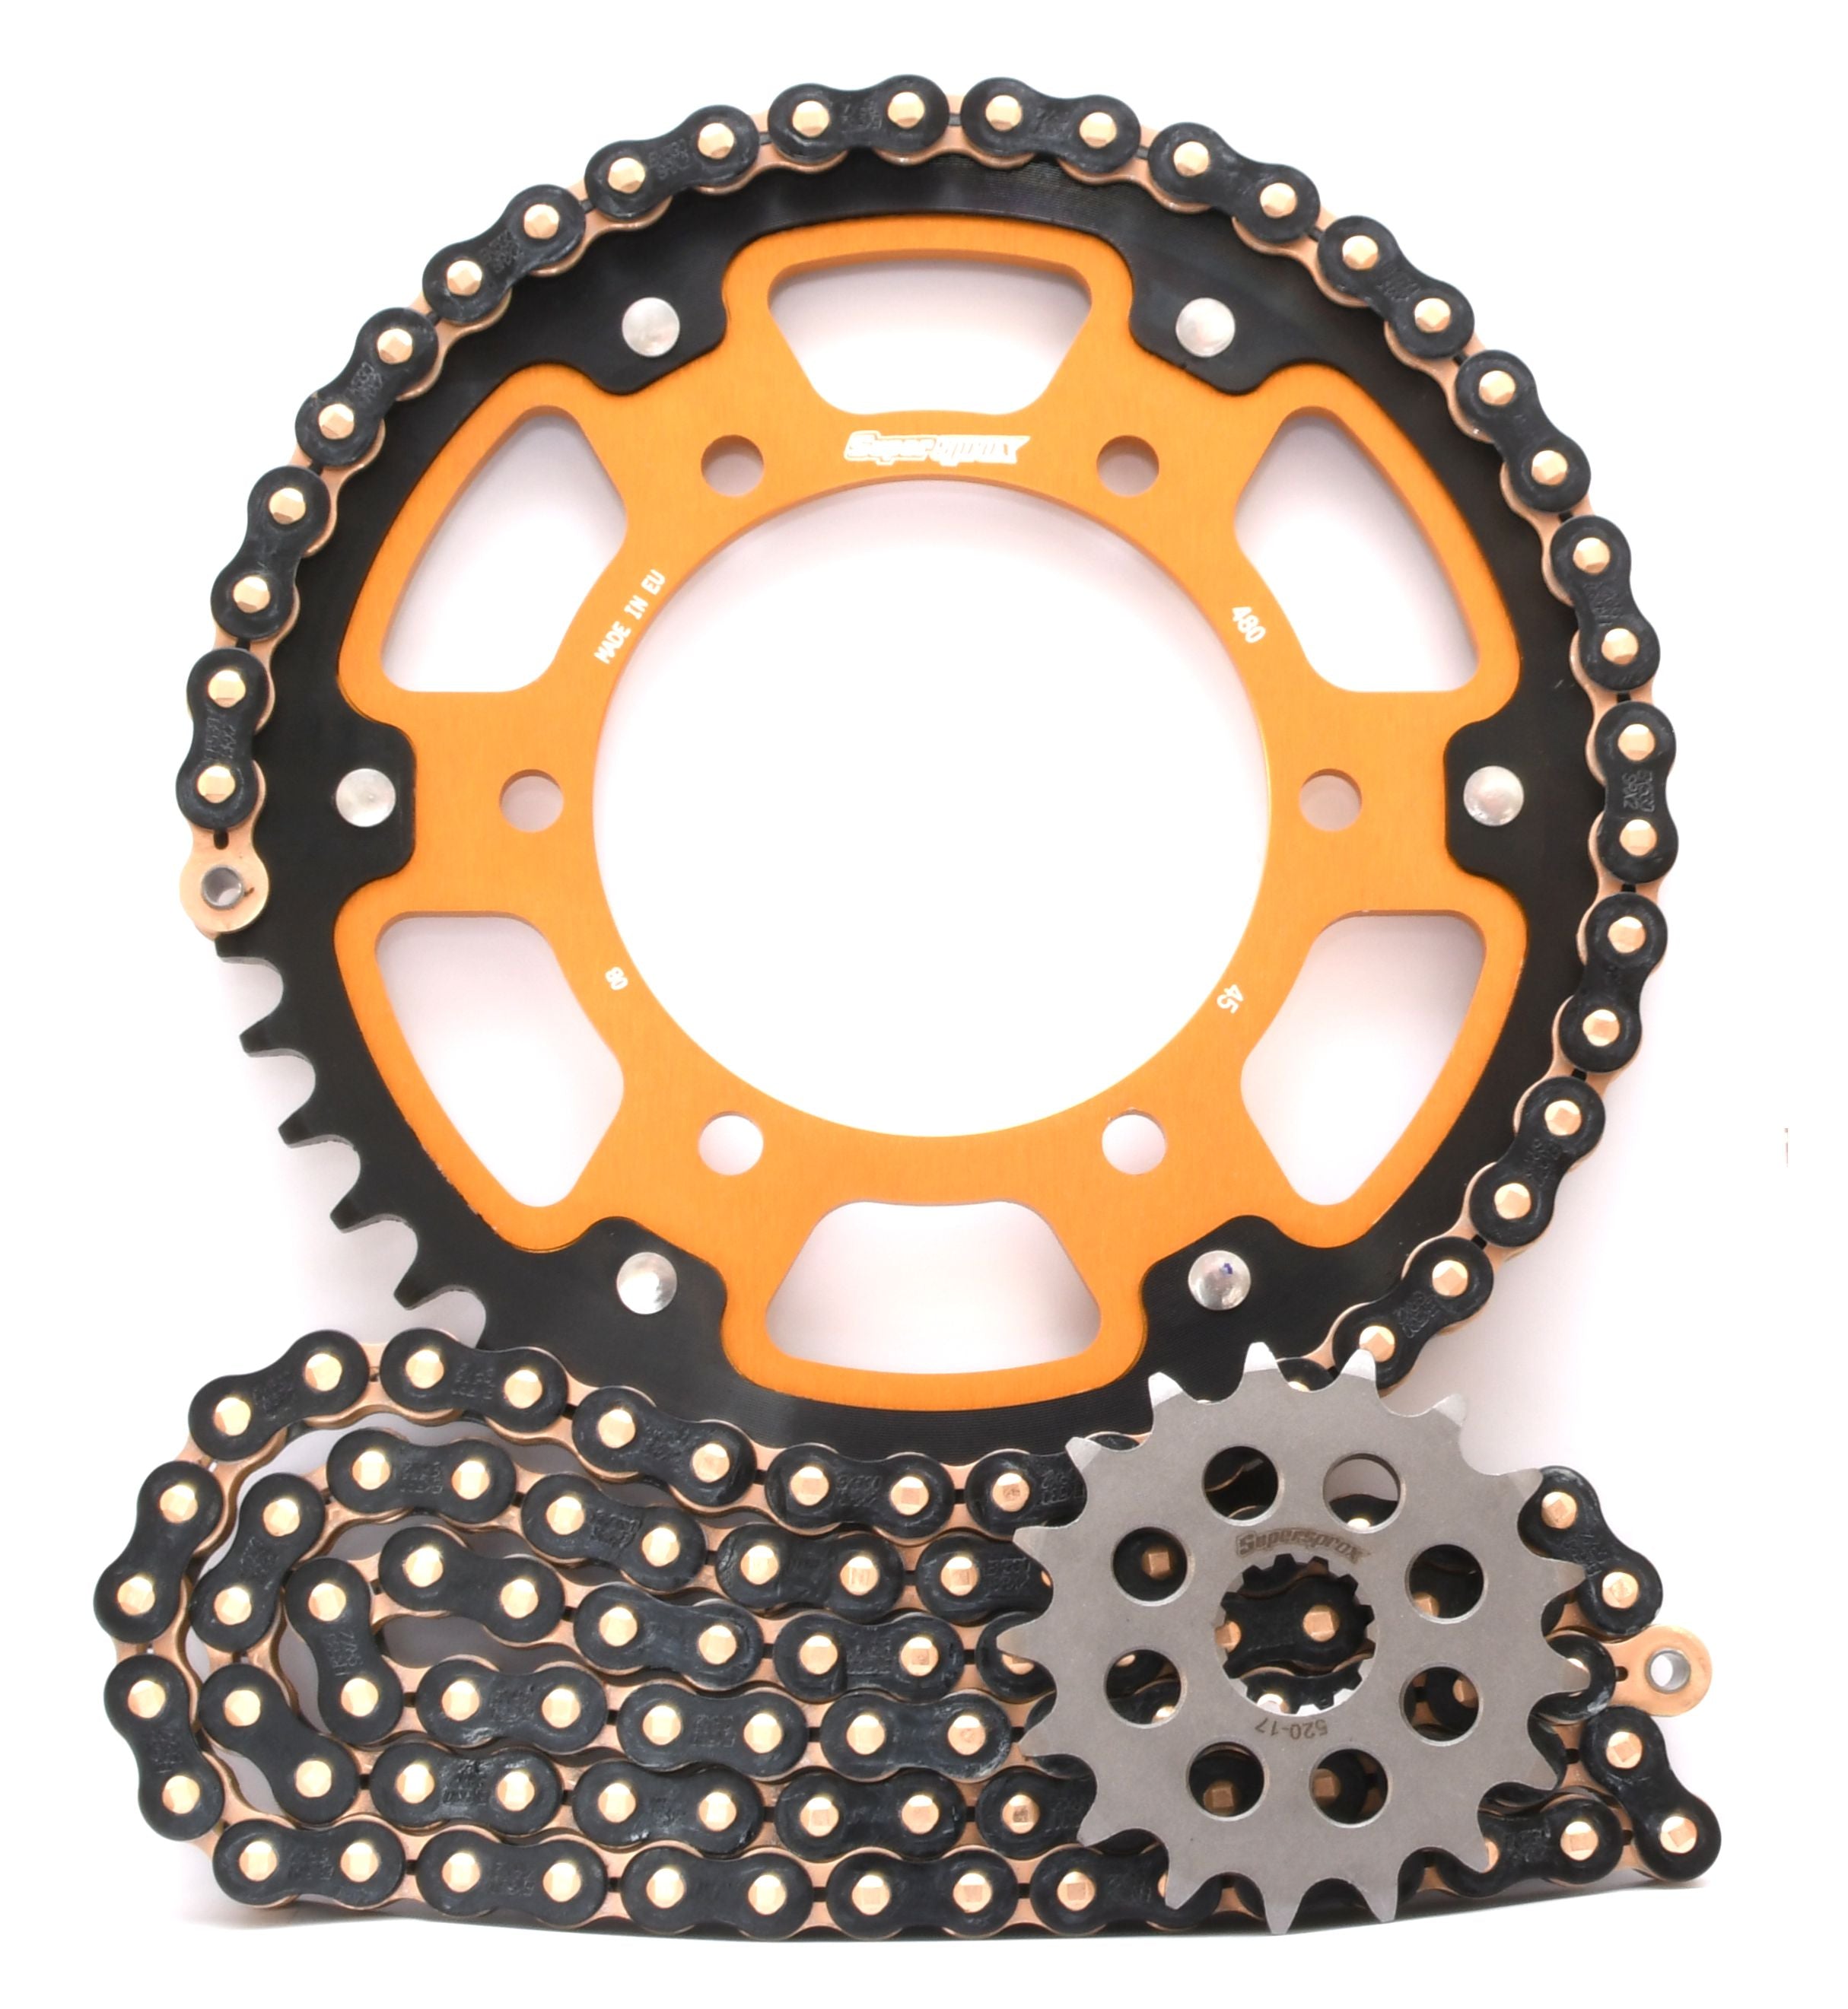 Supersprox Chain & Sprocket Kit for Yamaha YZF R1 2006-2008 - Standard Gearing